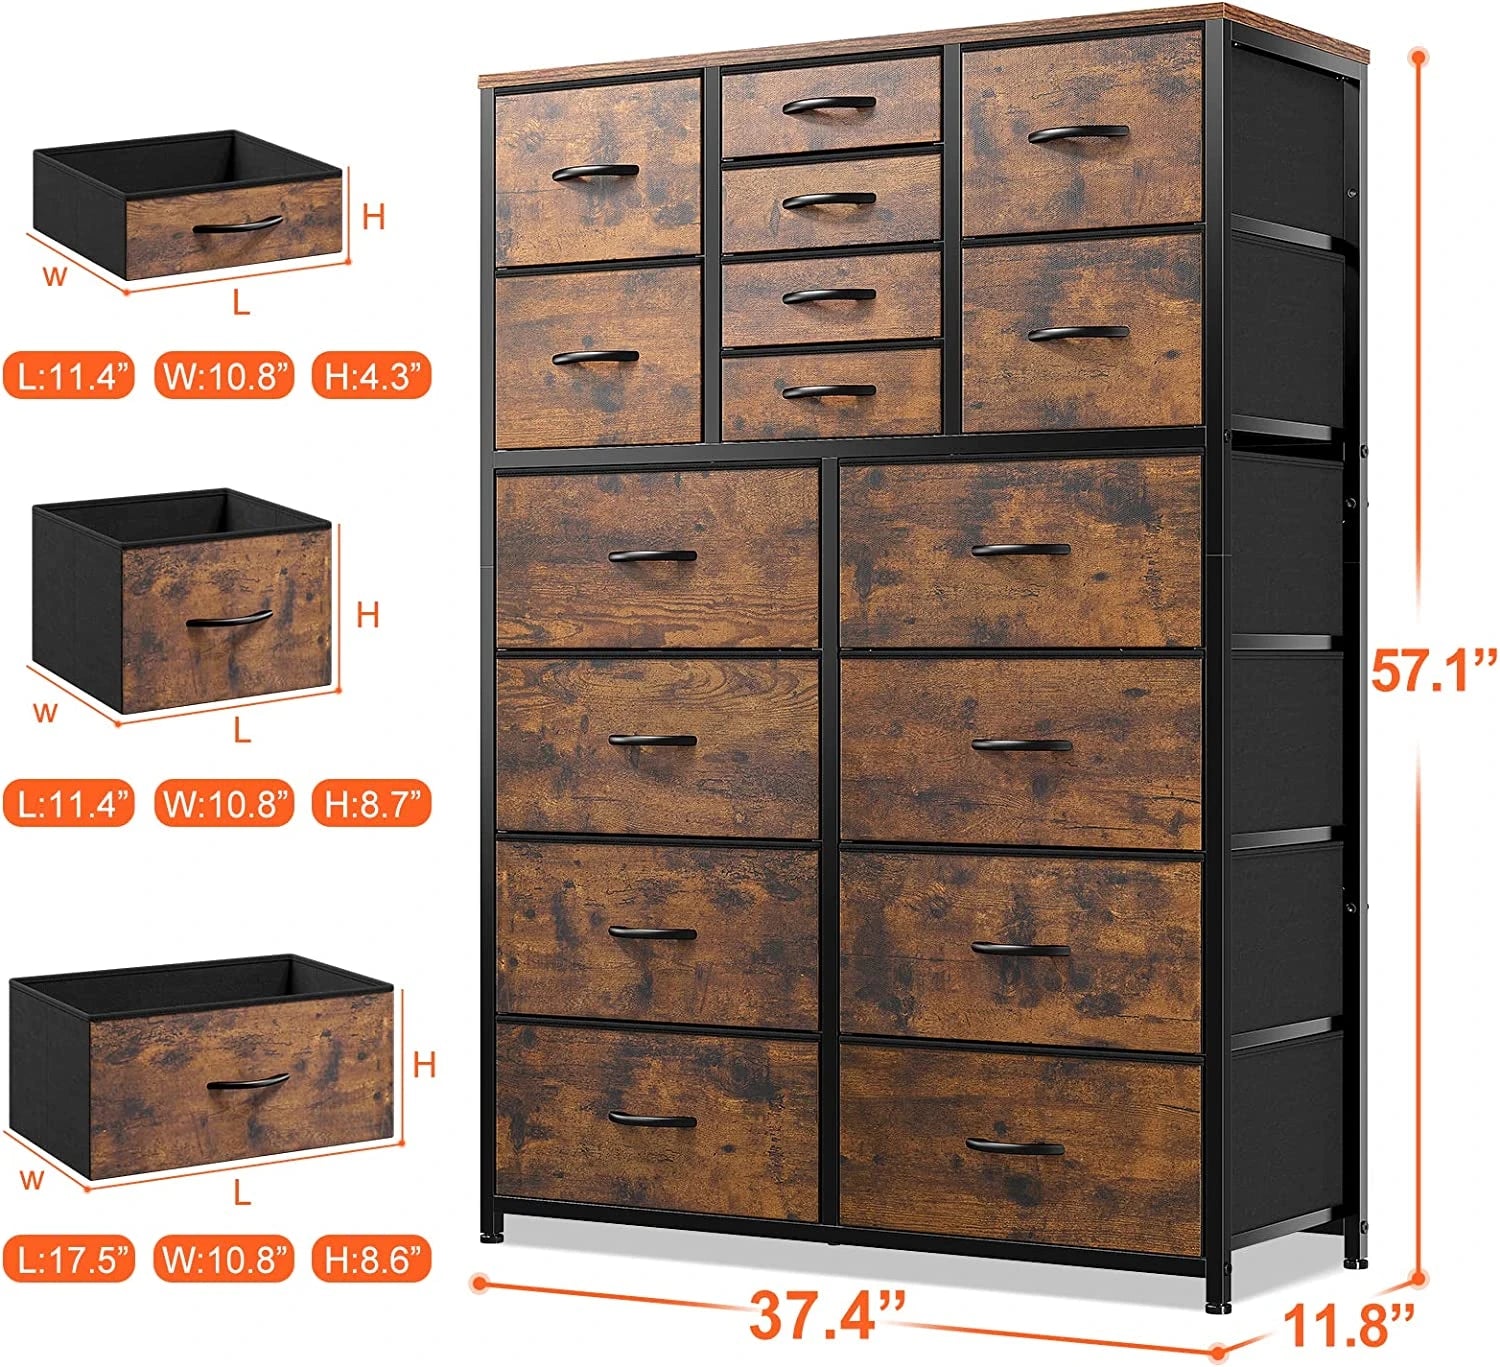 Enhomee tall dresser with 16 drawers dimension